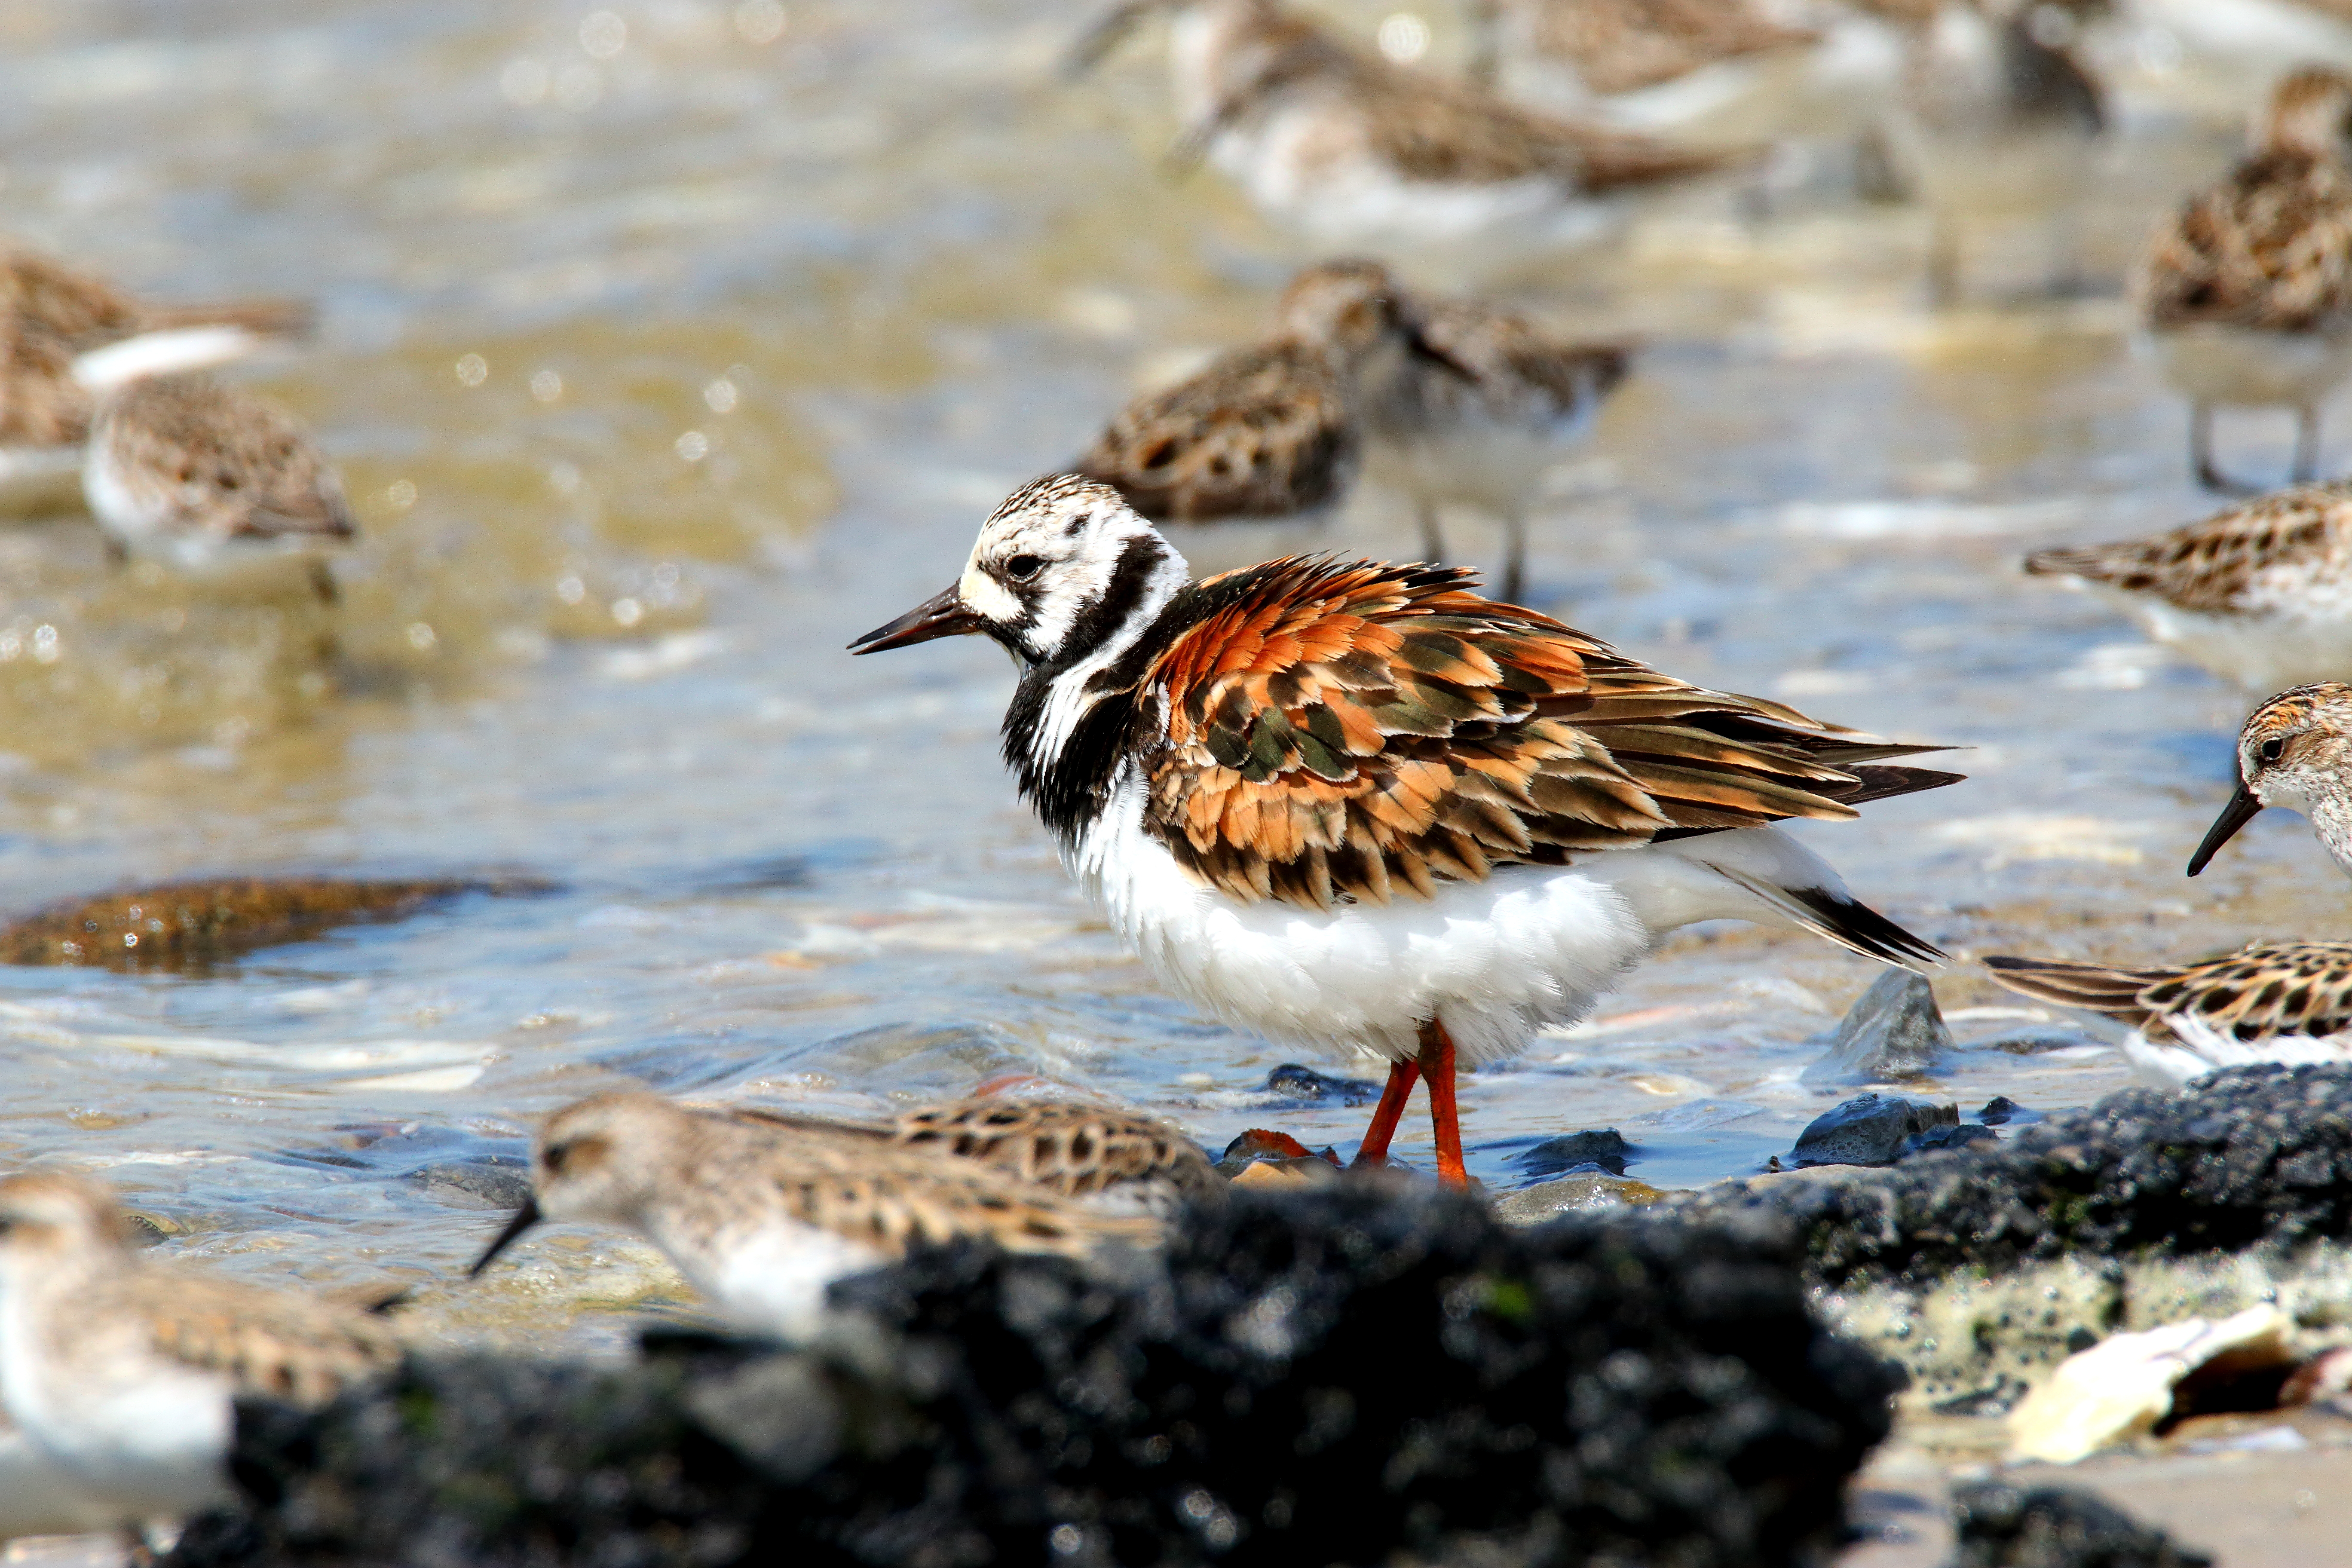 A Ruddy Turnstone, flanked by Semipalmated Sandpipers, visits Big Egg Marsh. Photo: <a href="https://www.flickr.com/photos/120553232@N02/" target="_blank">Isaac Grant</a>